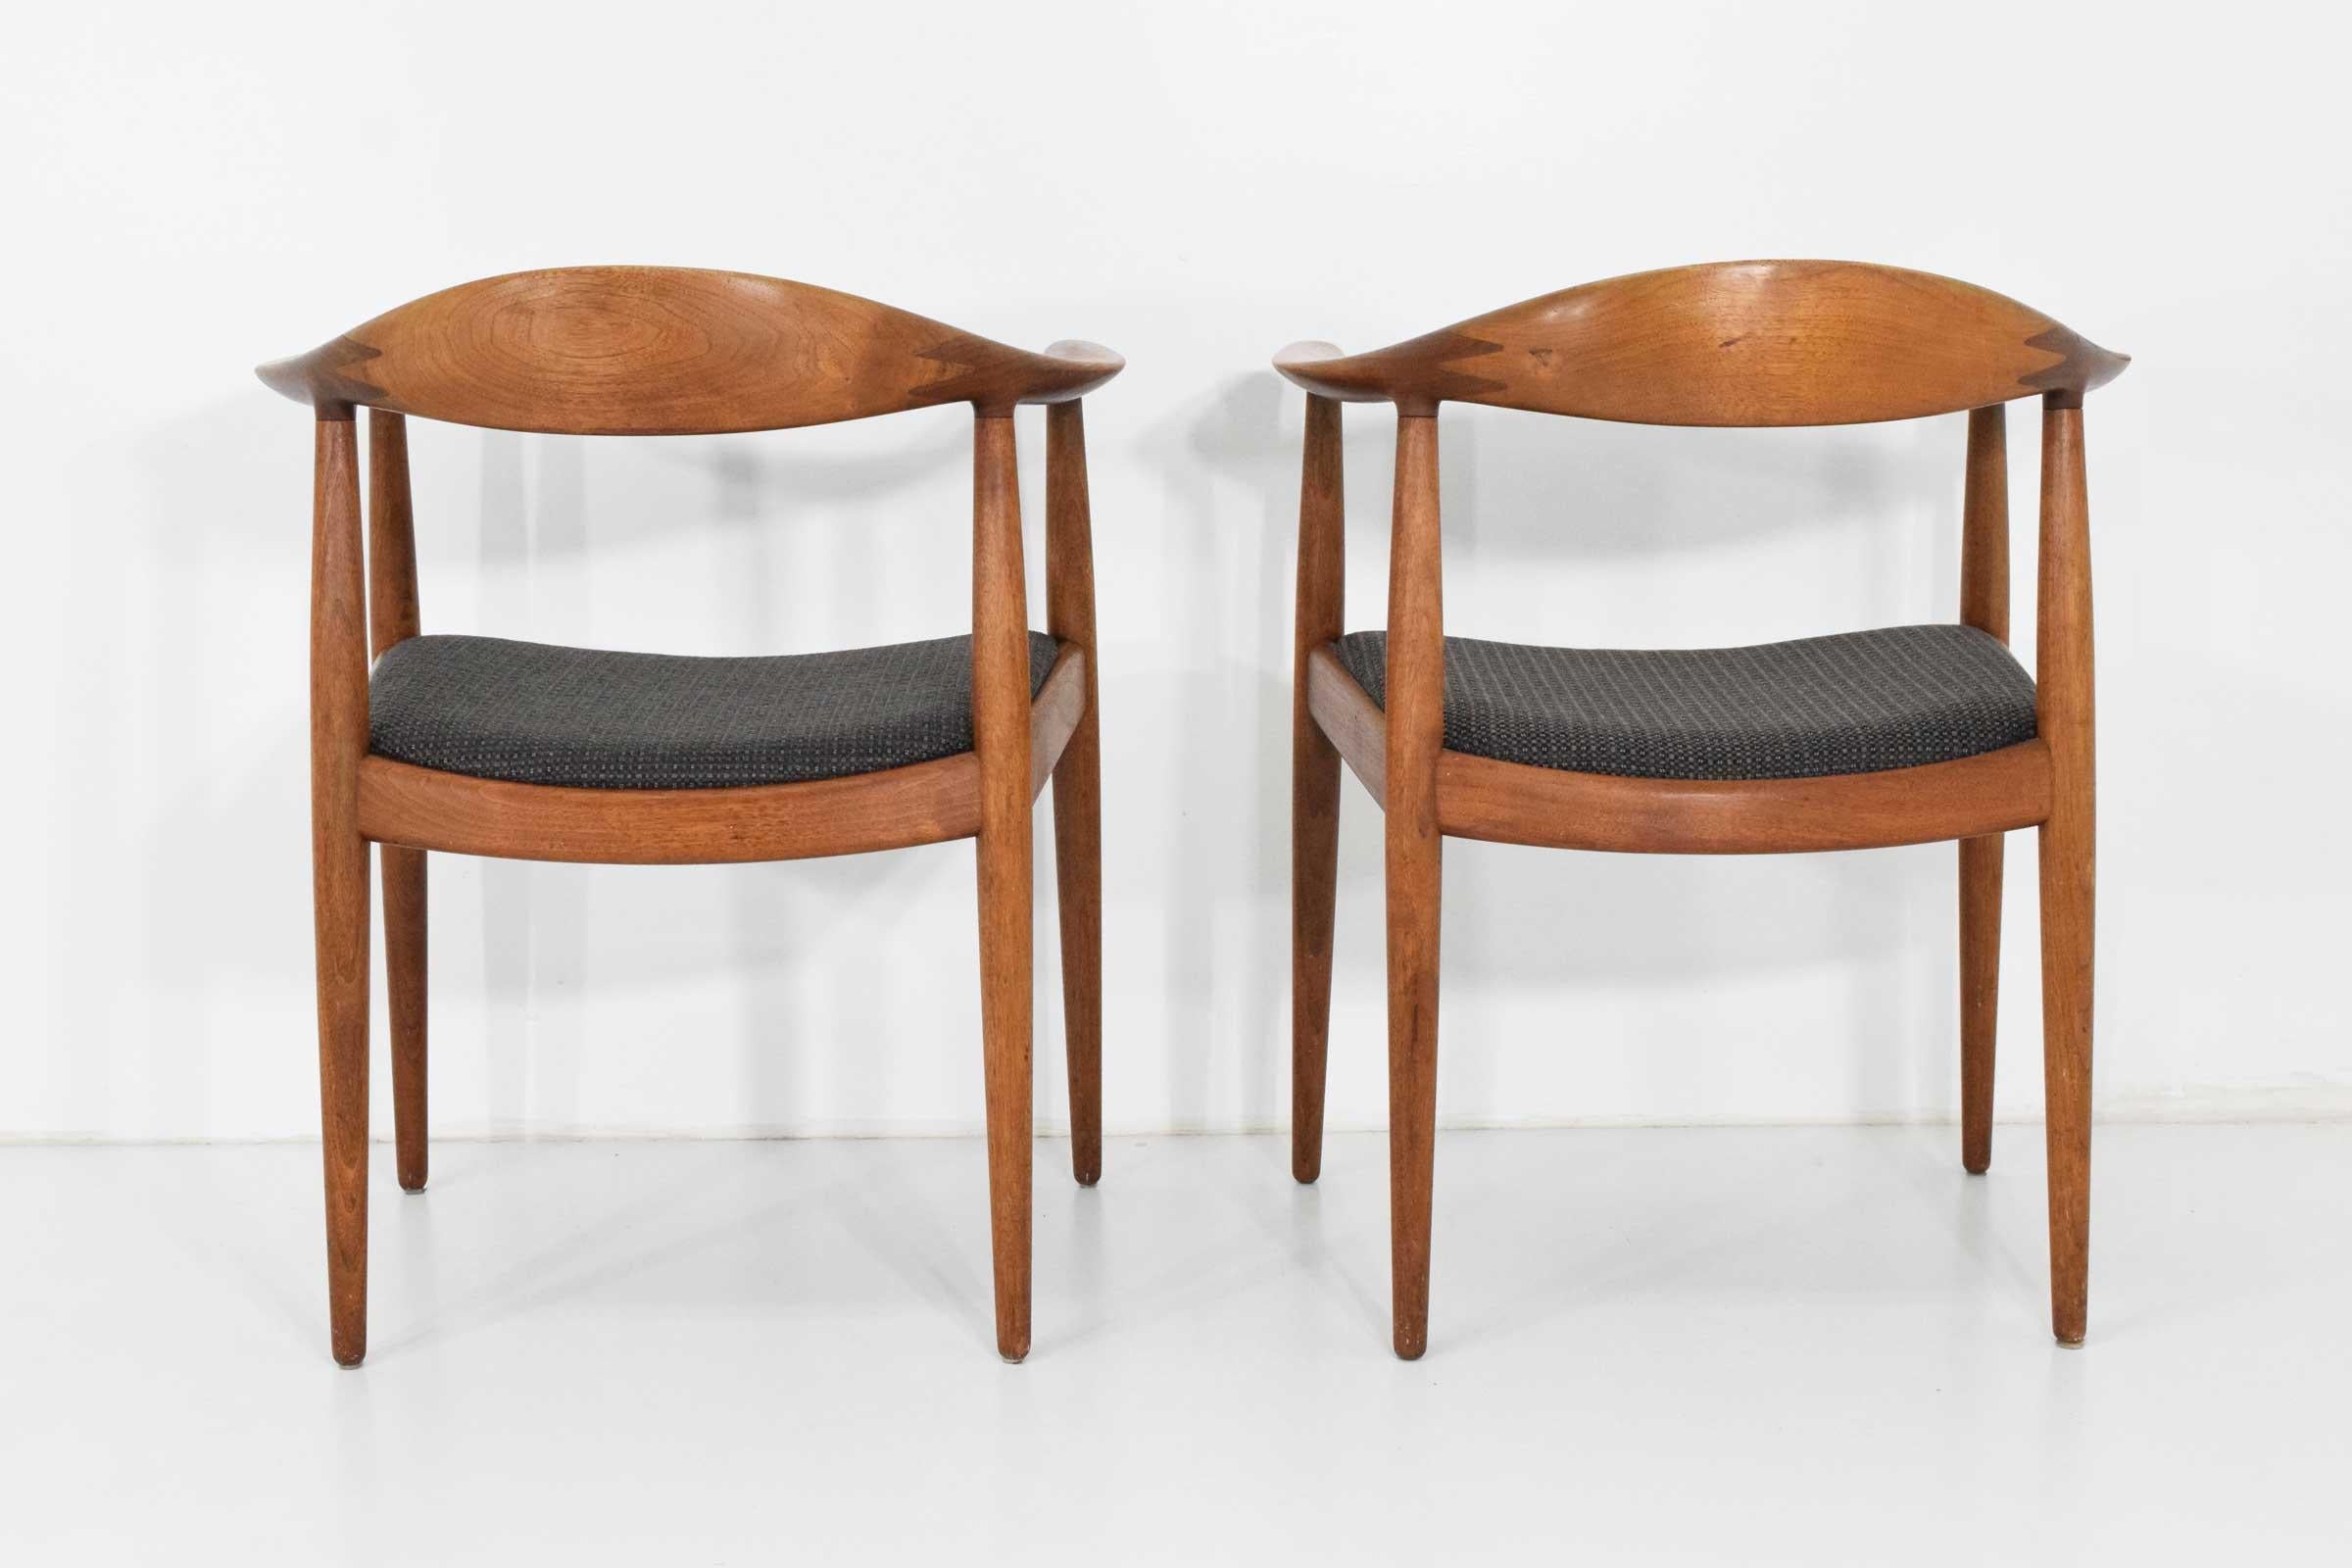 Hans Wegner Round Chairs 8 Available 7